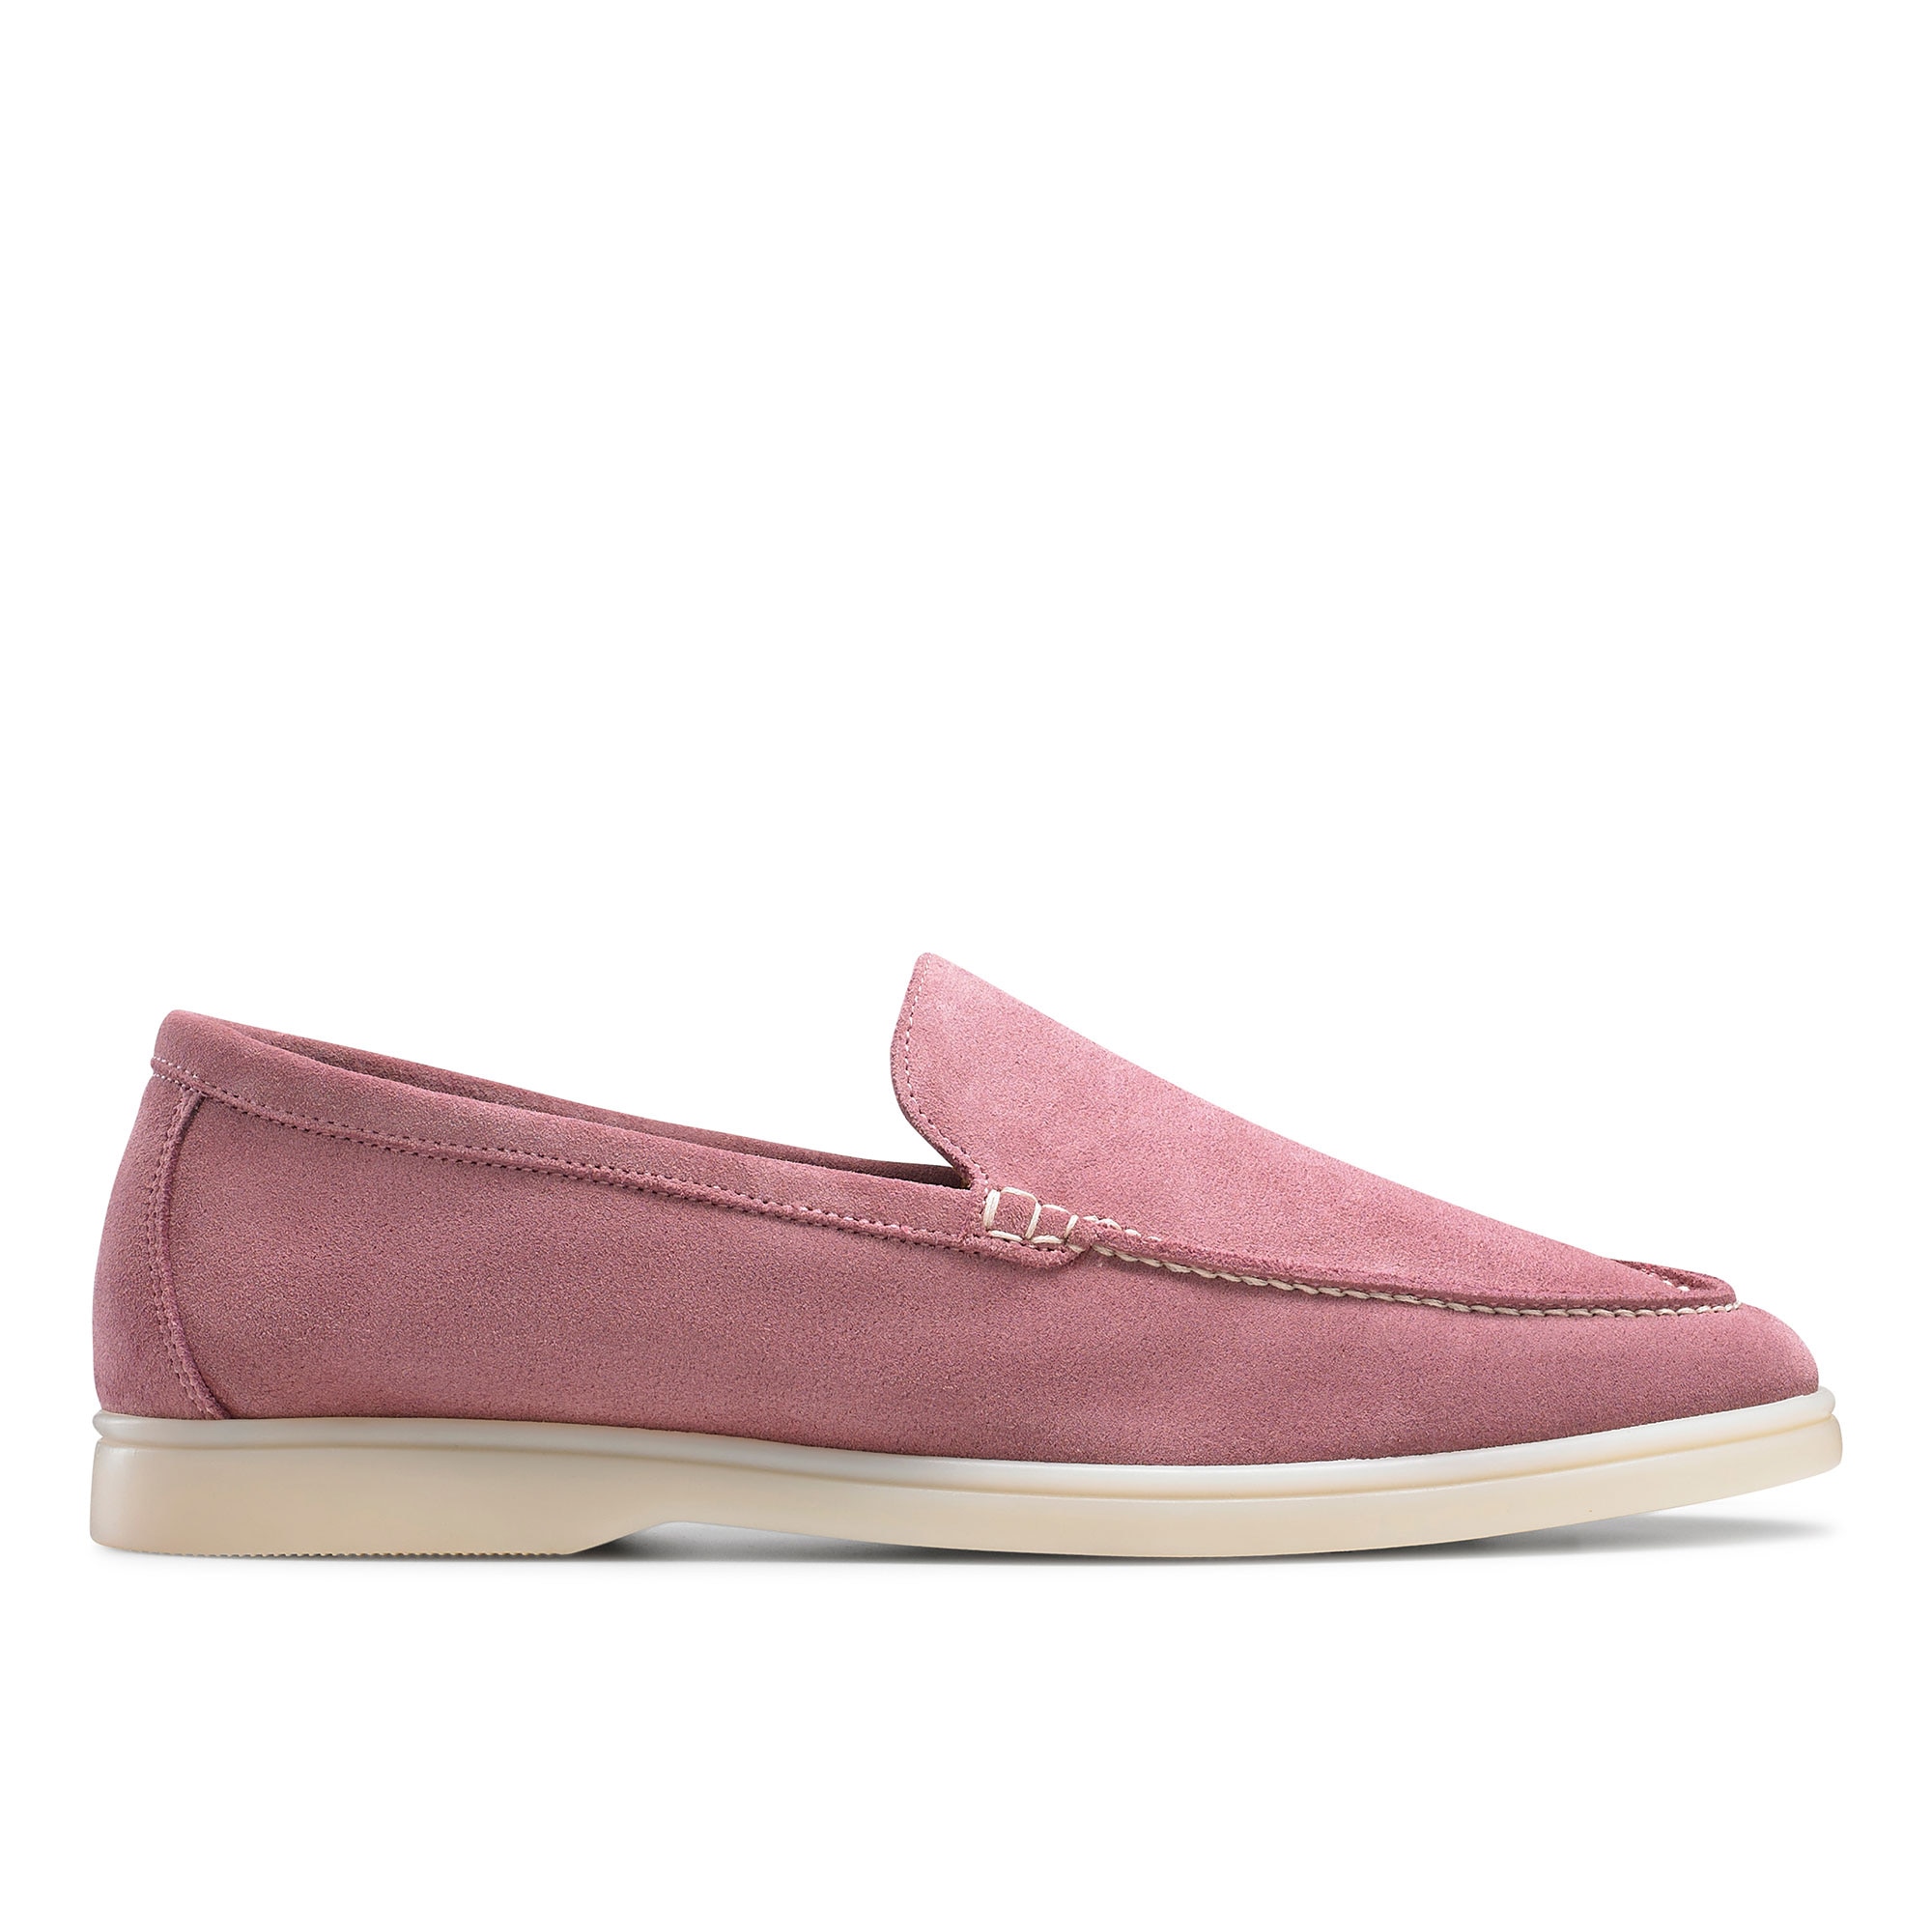 Russell and Bromley Carmel mens suede loafer in pink